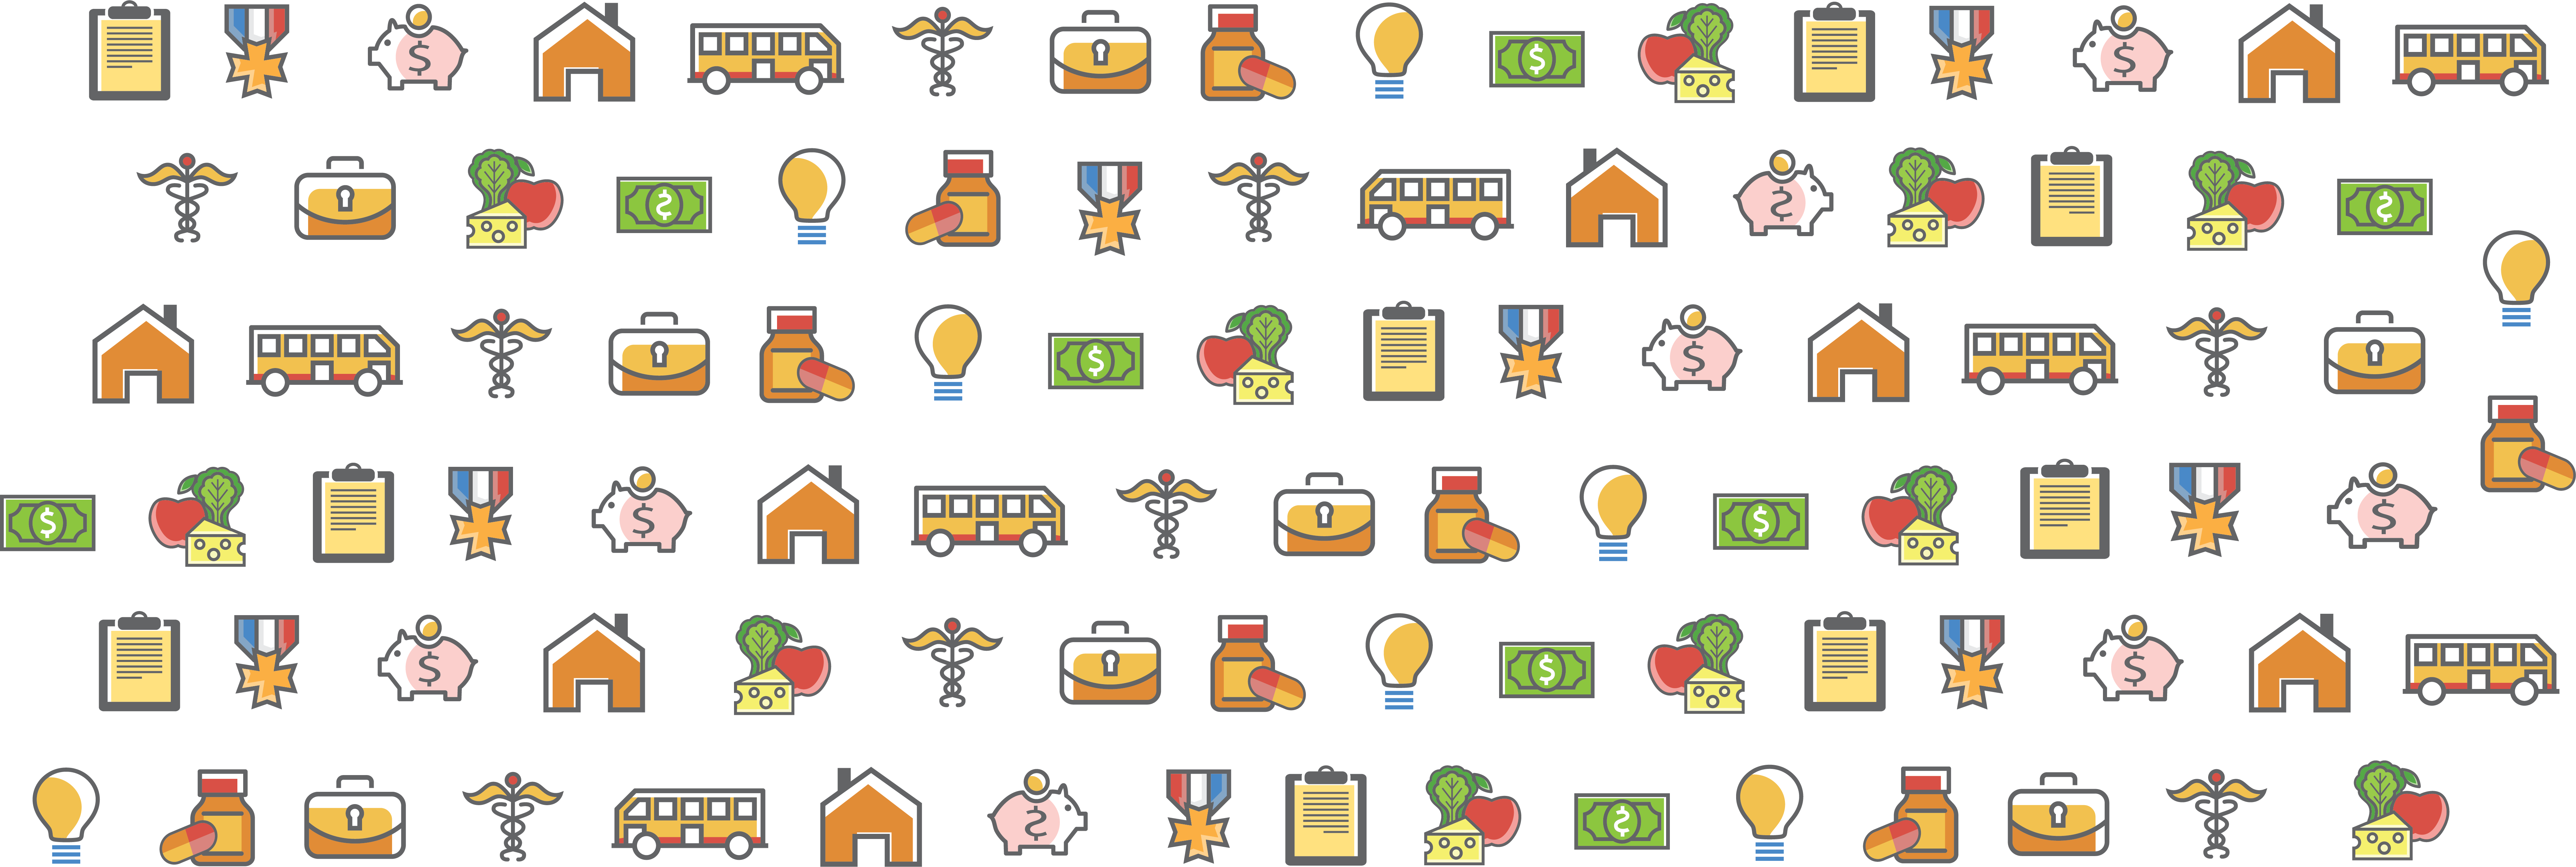 Graphic collage of icons representing benefits